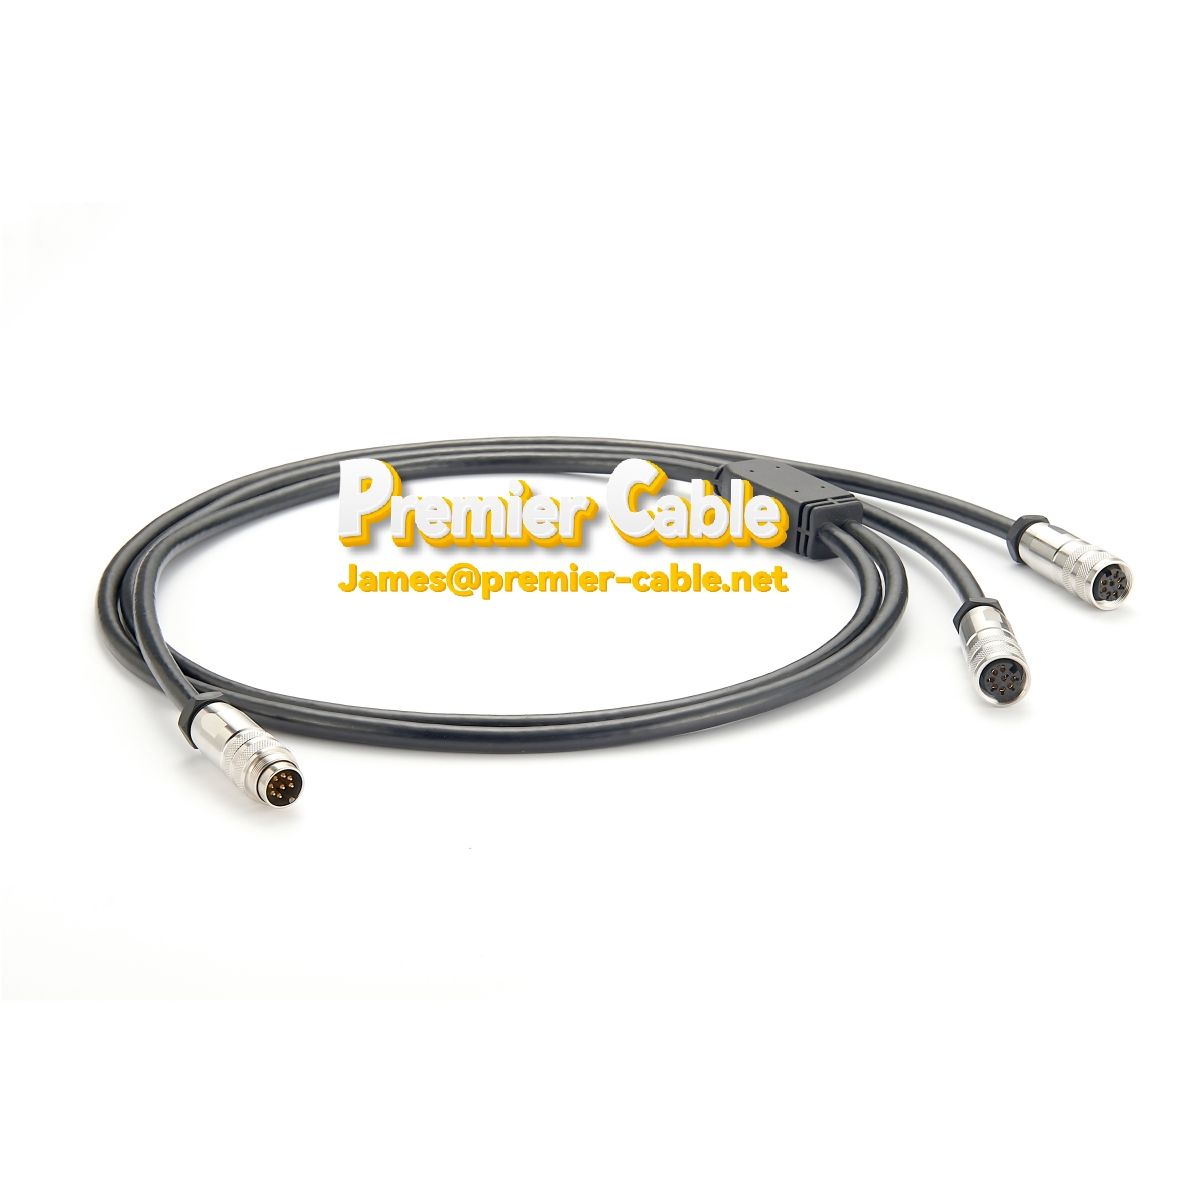 AISG Control Cable two-way RET Splitter